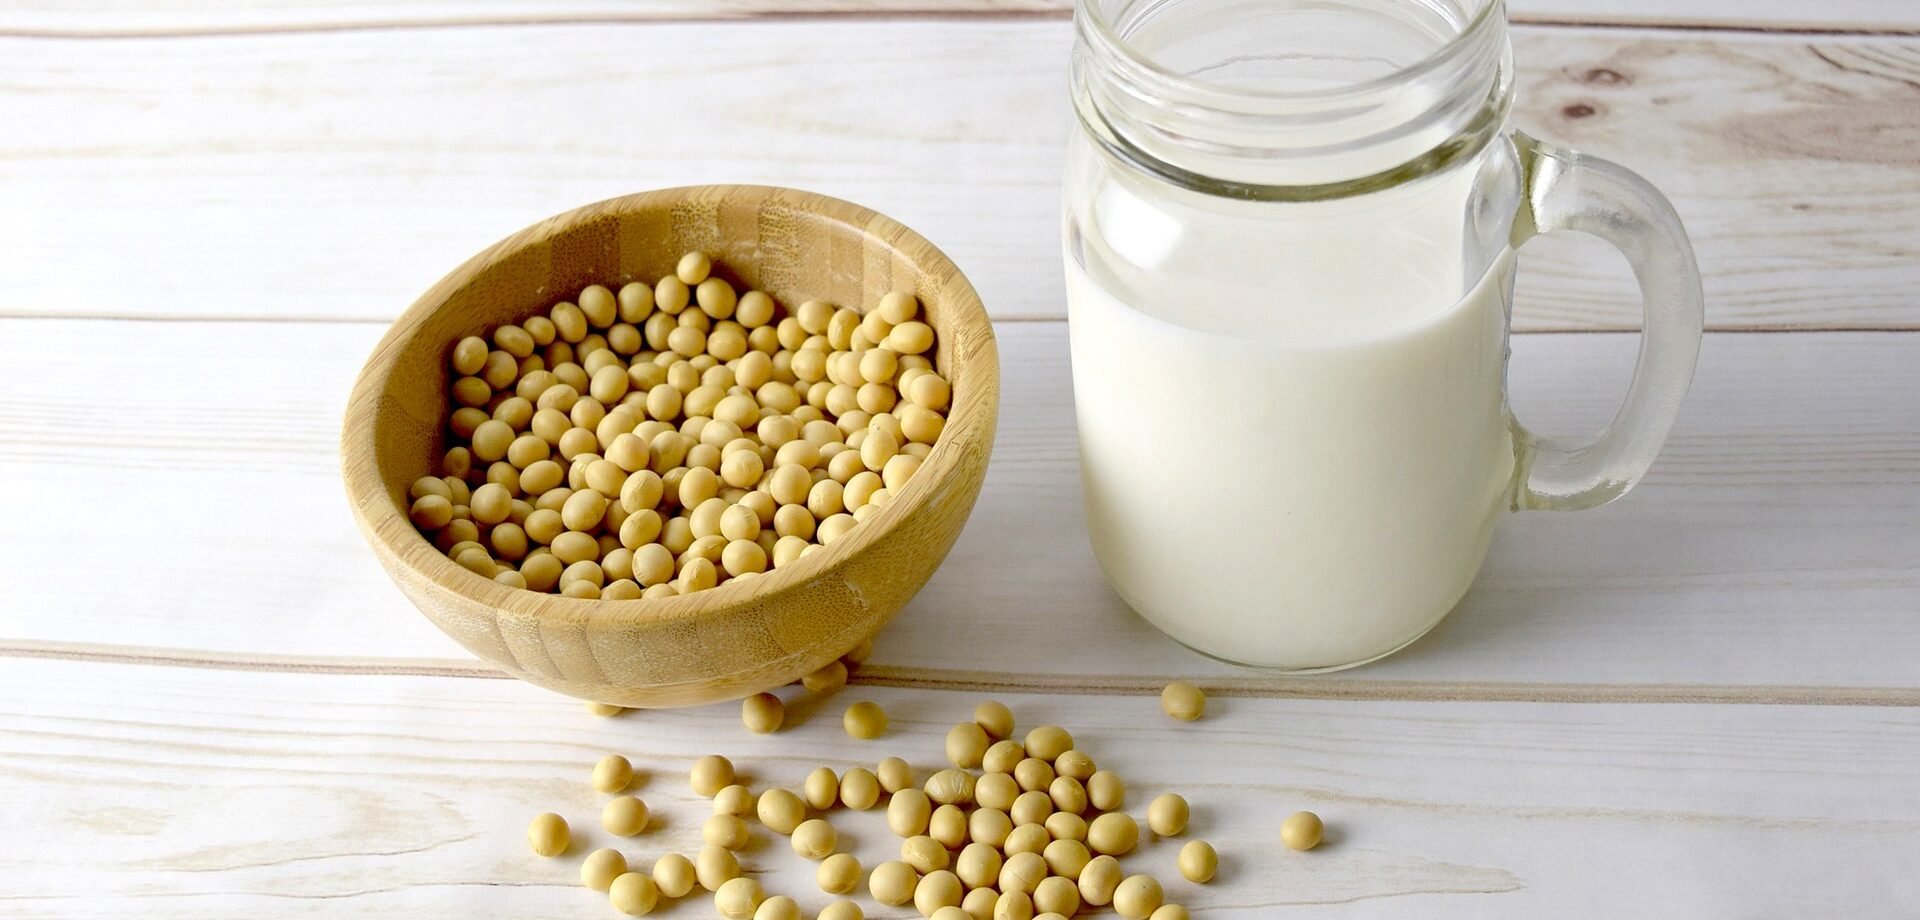 How Does Soy “Milk” Compare to Real Milk? - The Dairy Alliance